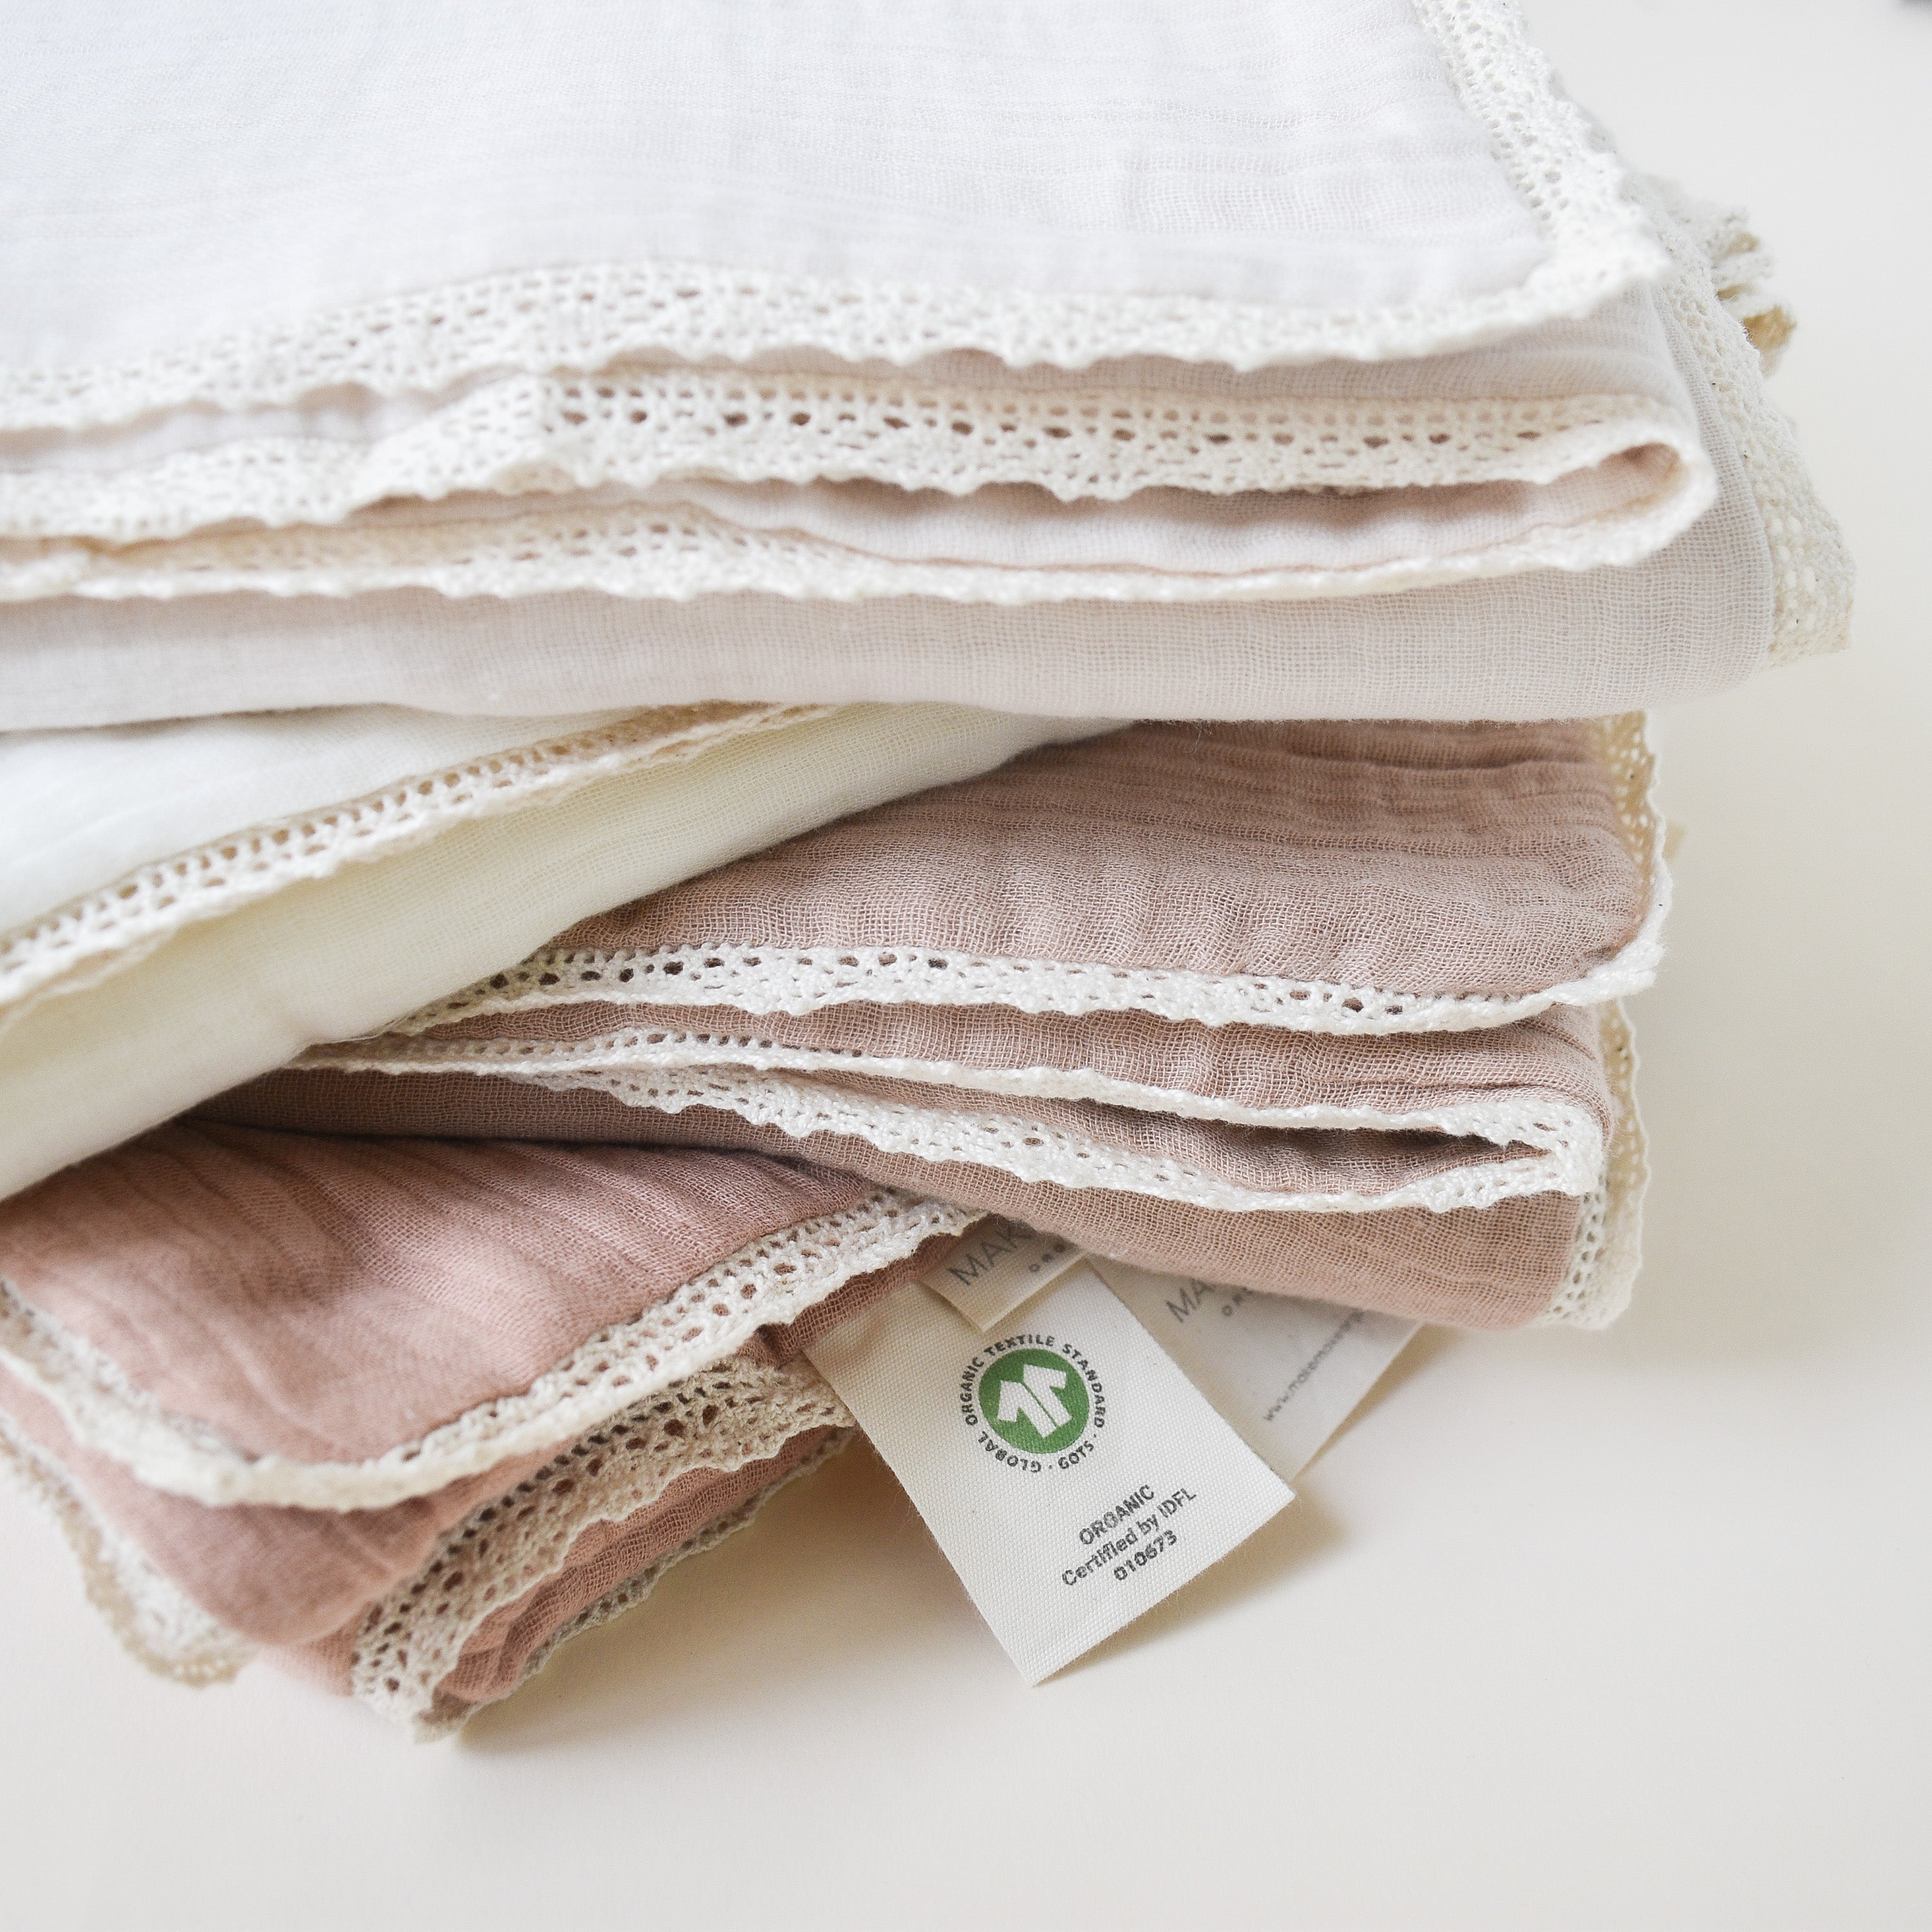 A stack of neatly folded Makemake Organics Organic Cotton Muslin Blanket - Blush Oat + Ivory Lace in shades of white and pink, each edged with delicate lace, displaying a green certification tag.